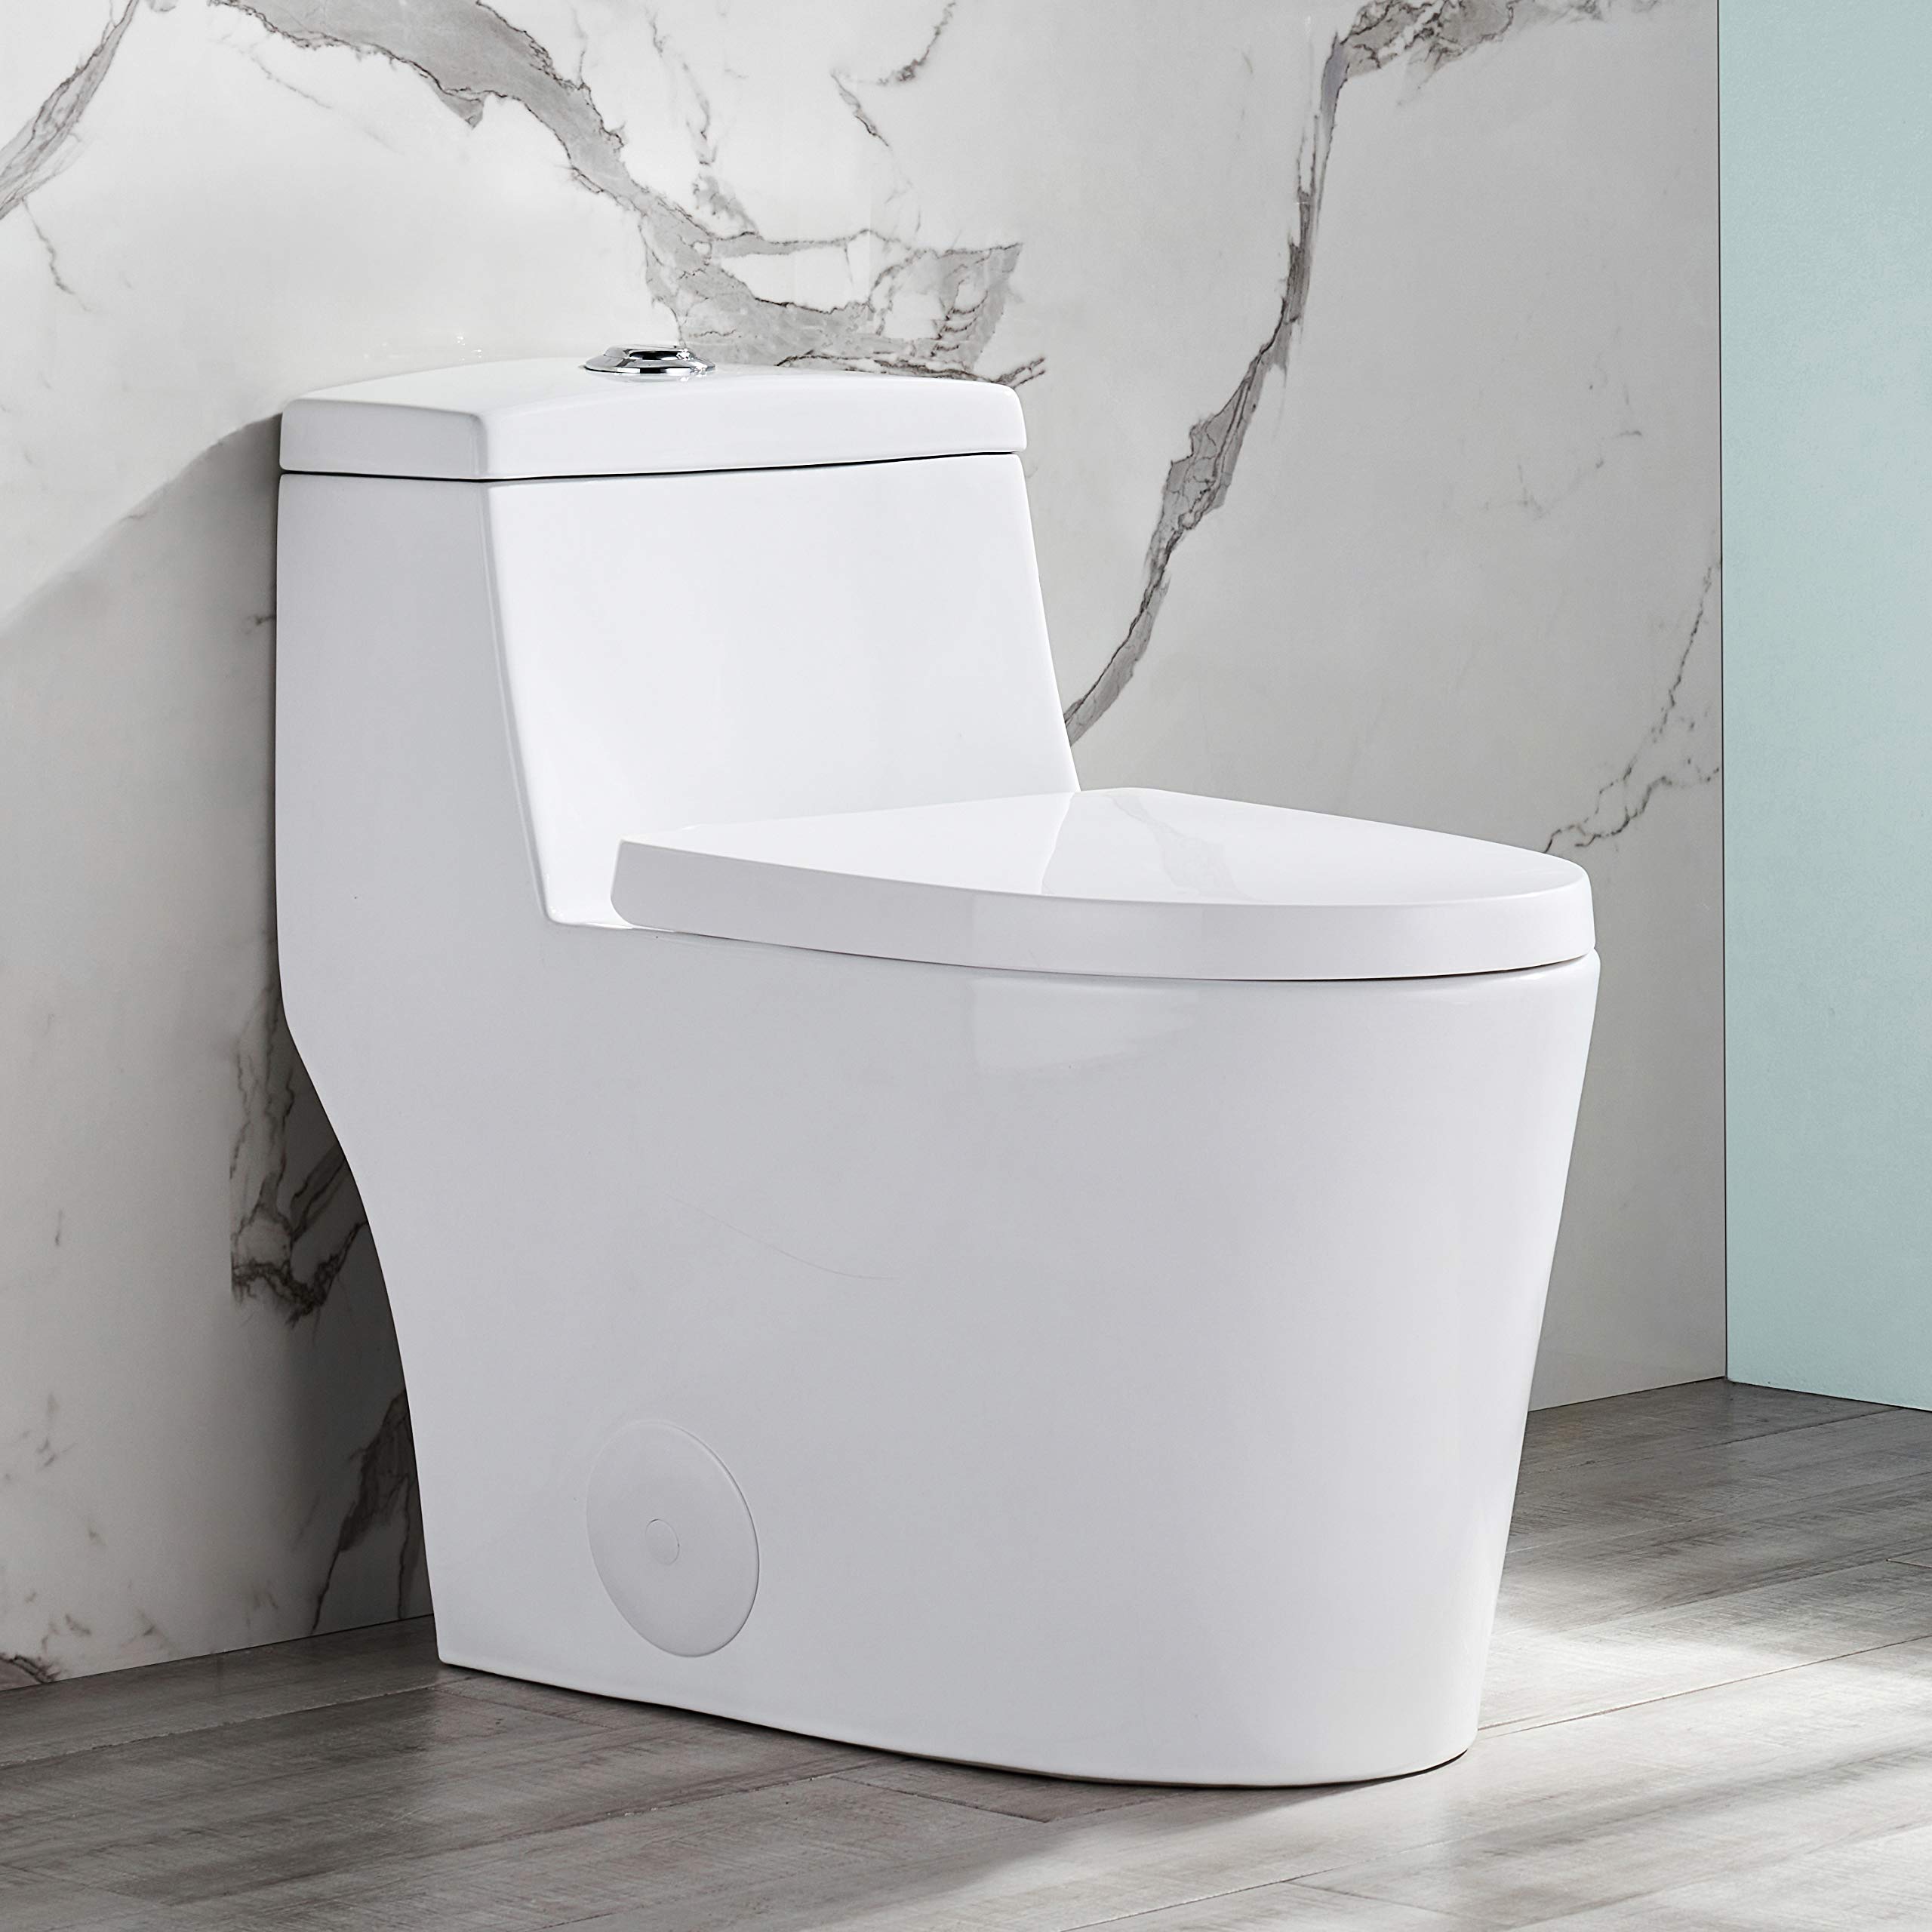 DeerValley DV-1F52636 Prism Modern Comfortable Seat Height Dual Flush Elongated One-Piece Toilet with Soft Closing Seat